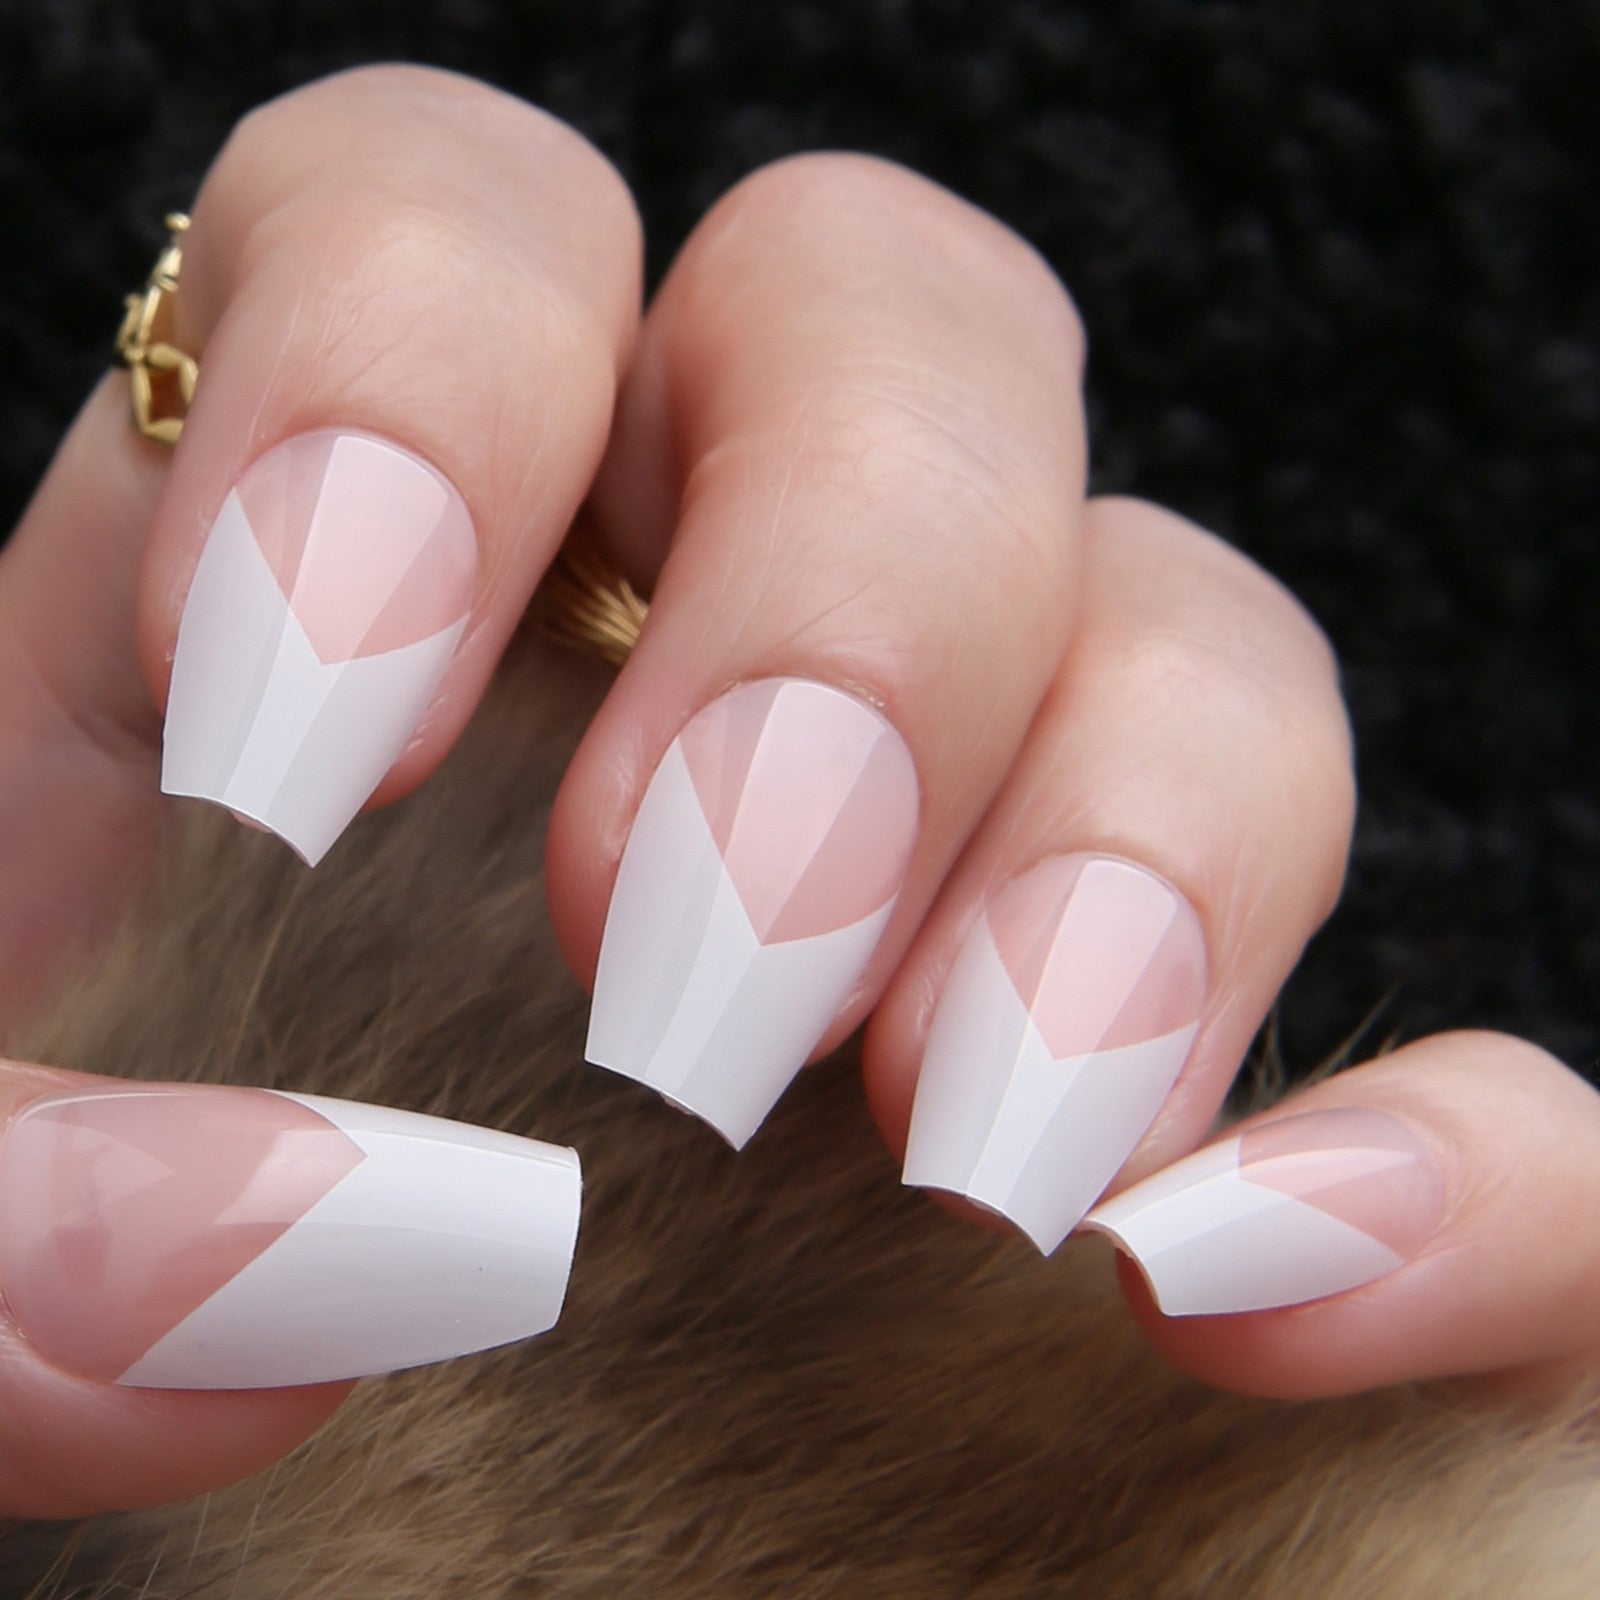 Faux Ongles Ballerine avec French en pointe Press On Nails